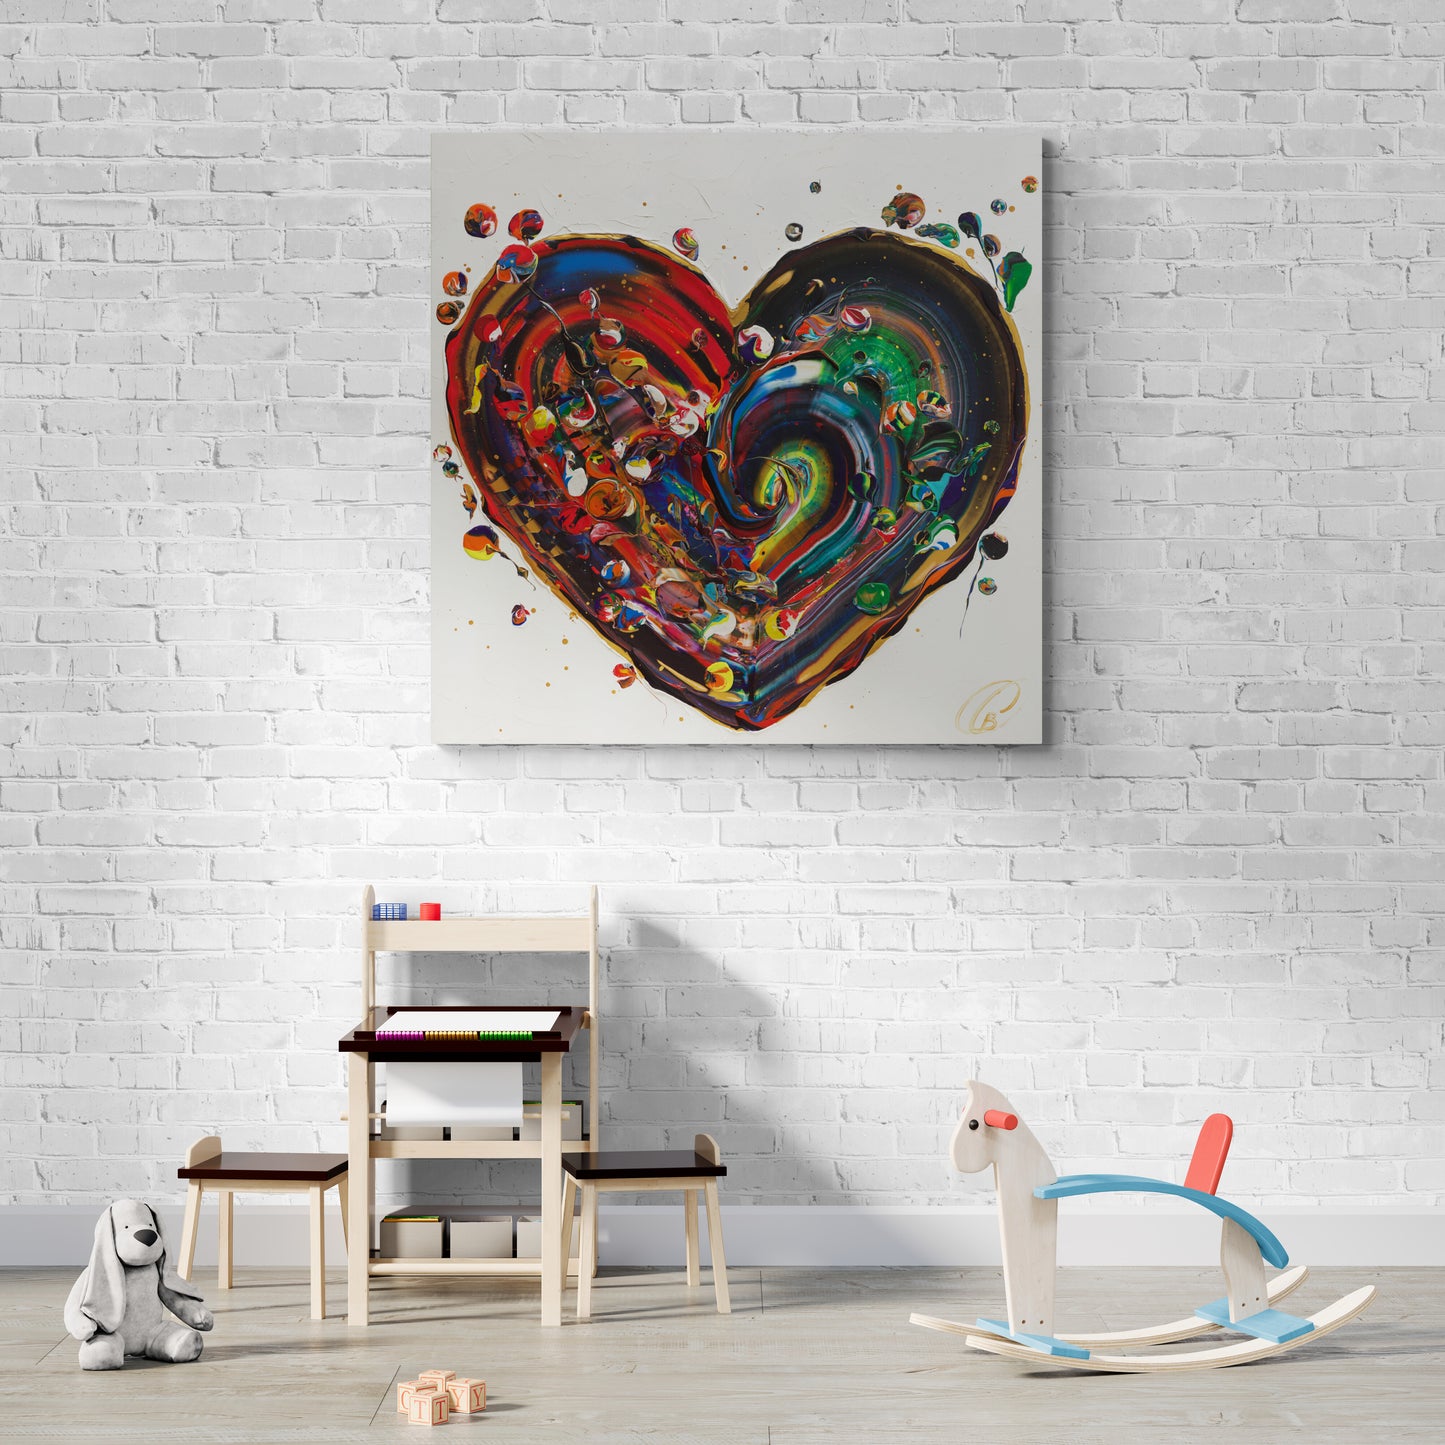 My heart said yes - Art Print Limited Edition